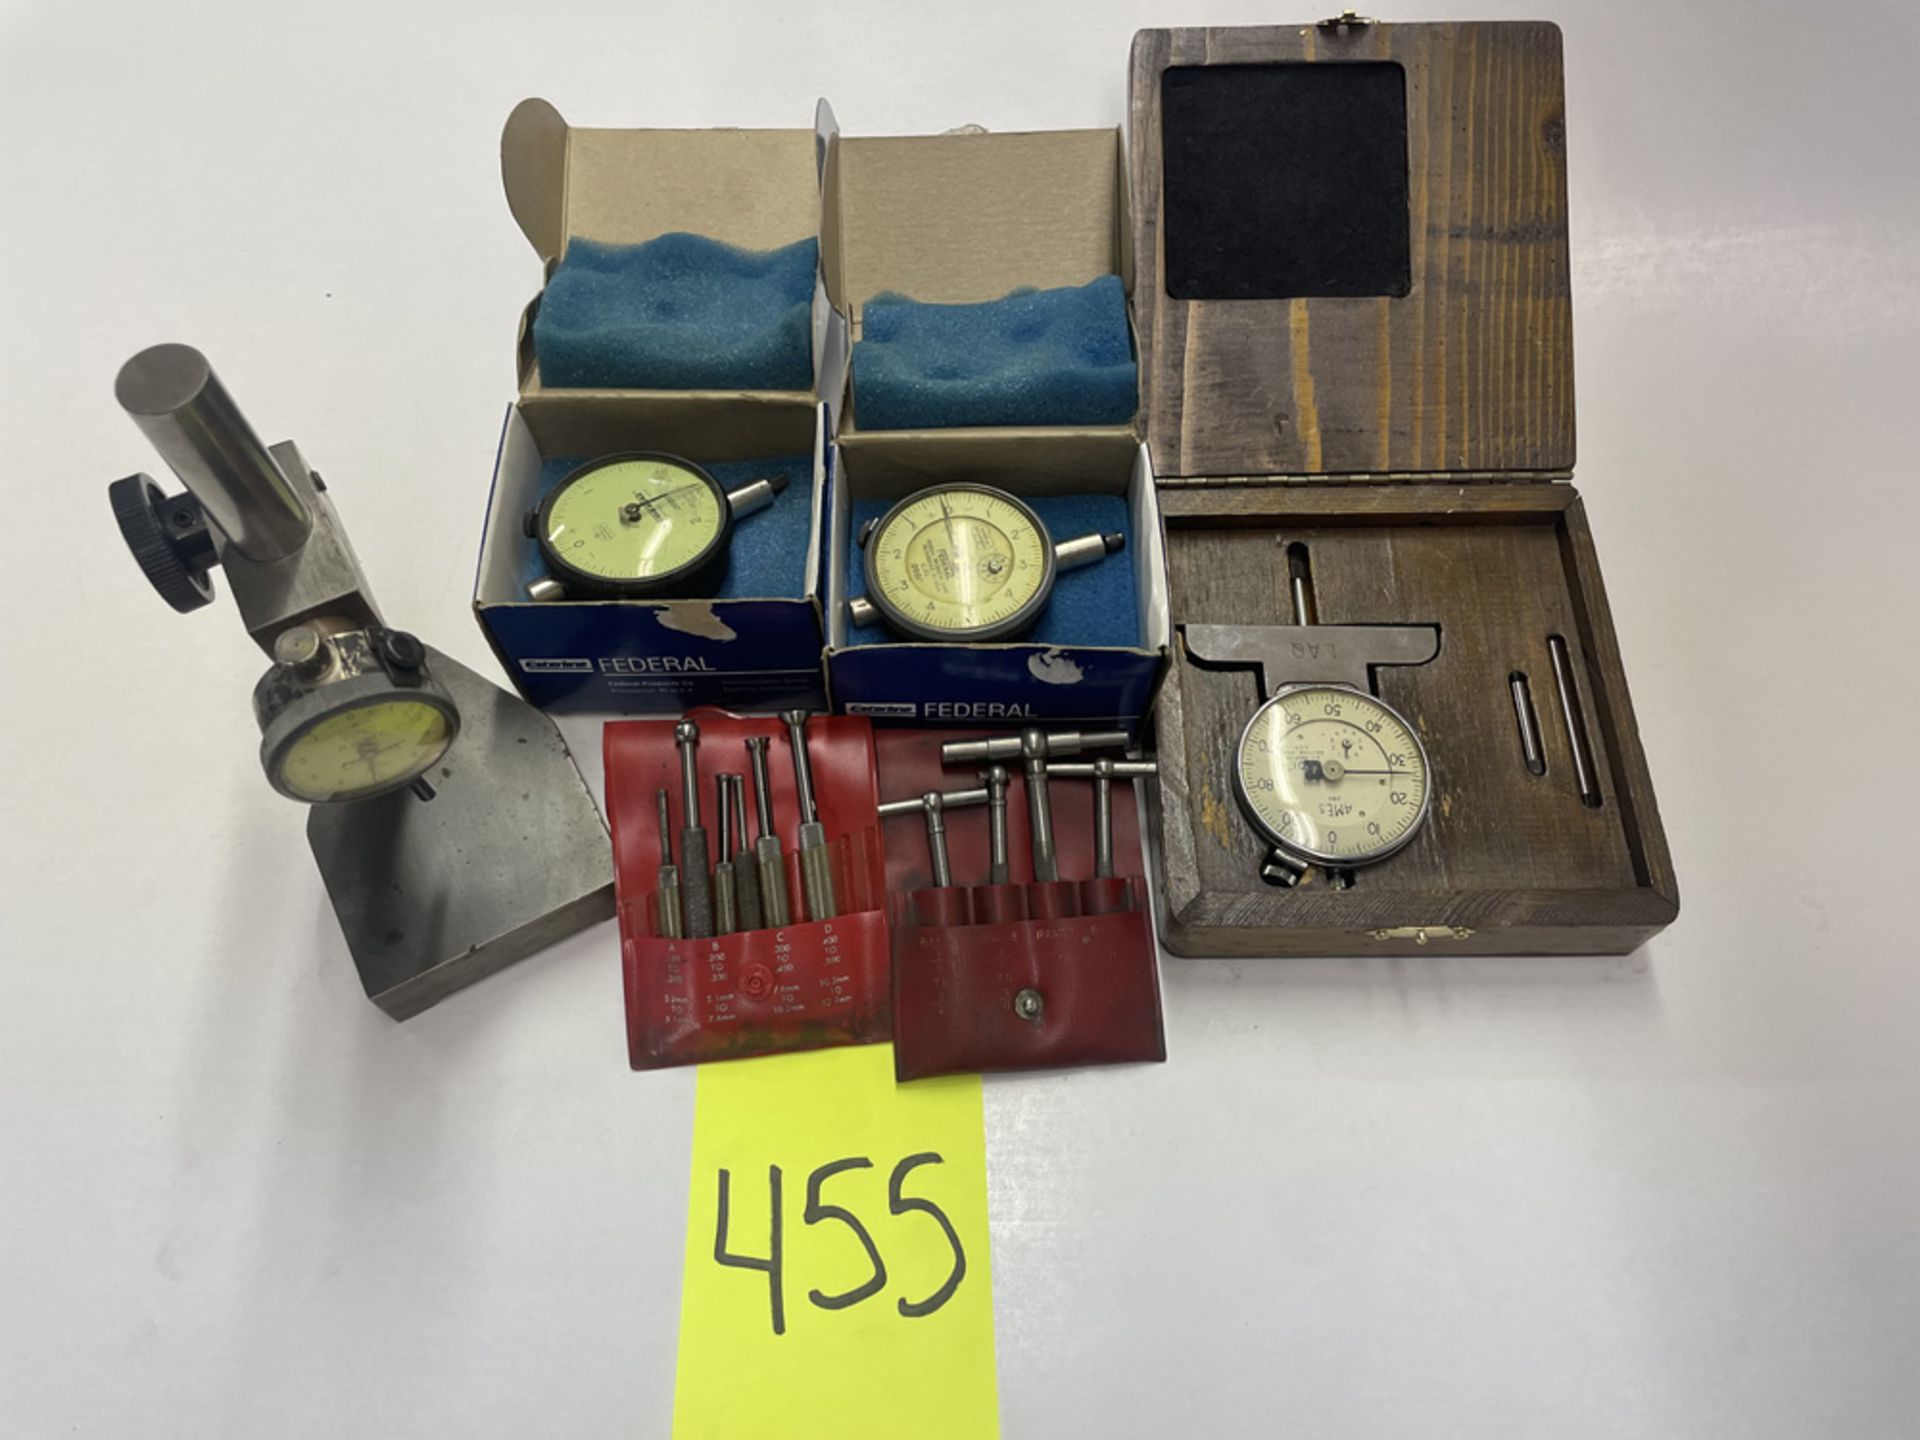 Lot including: 2-Federal .0001" Gages, Gage Stand, 1-Ames Gage in Wood Box, 2-